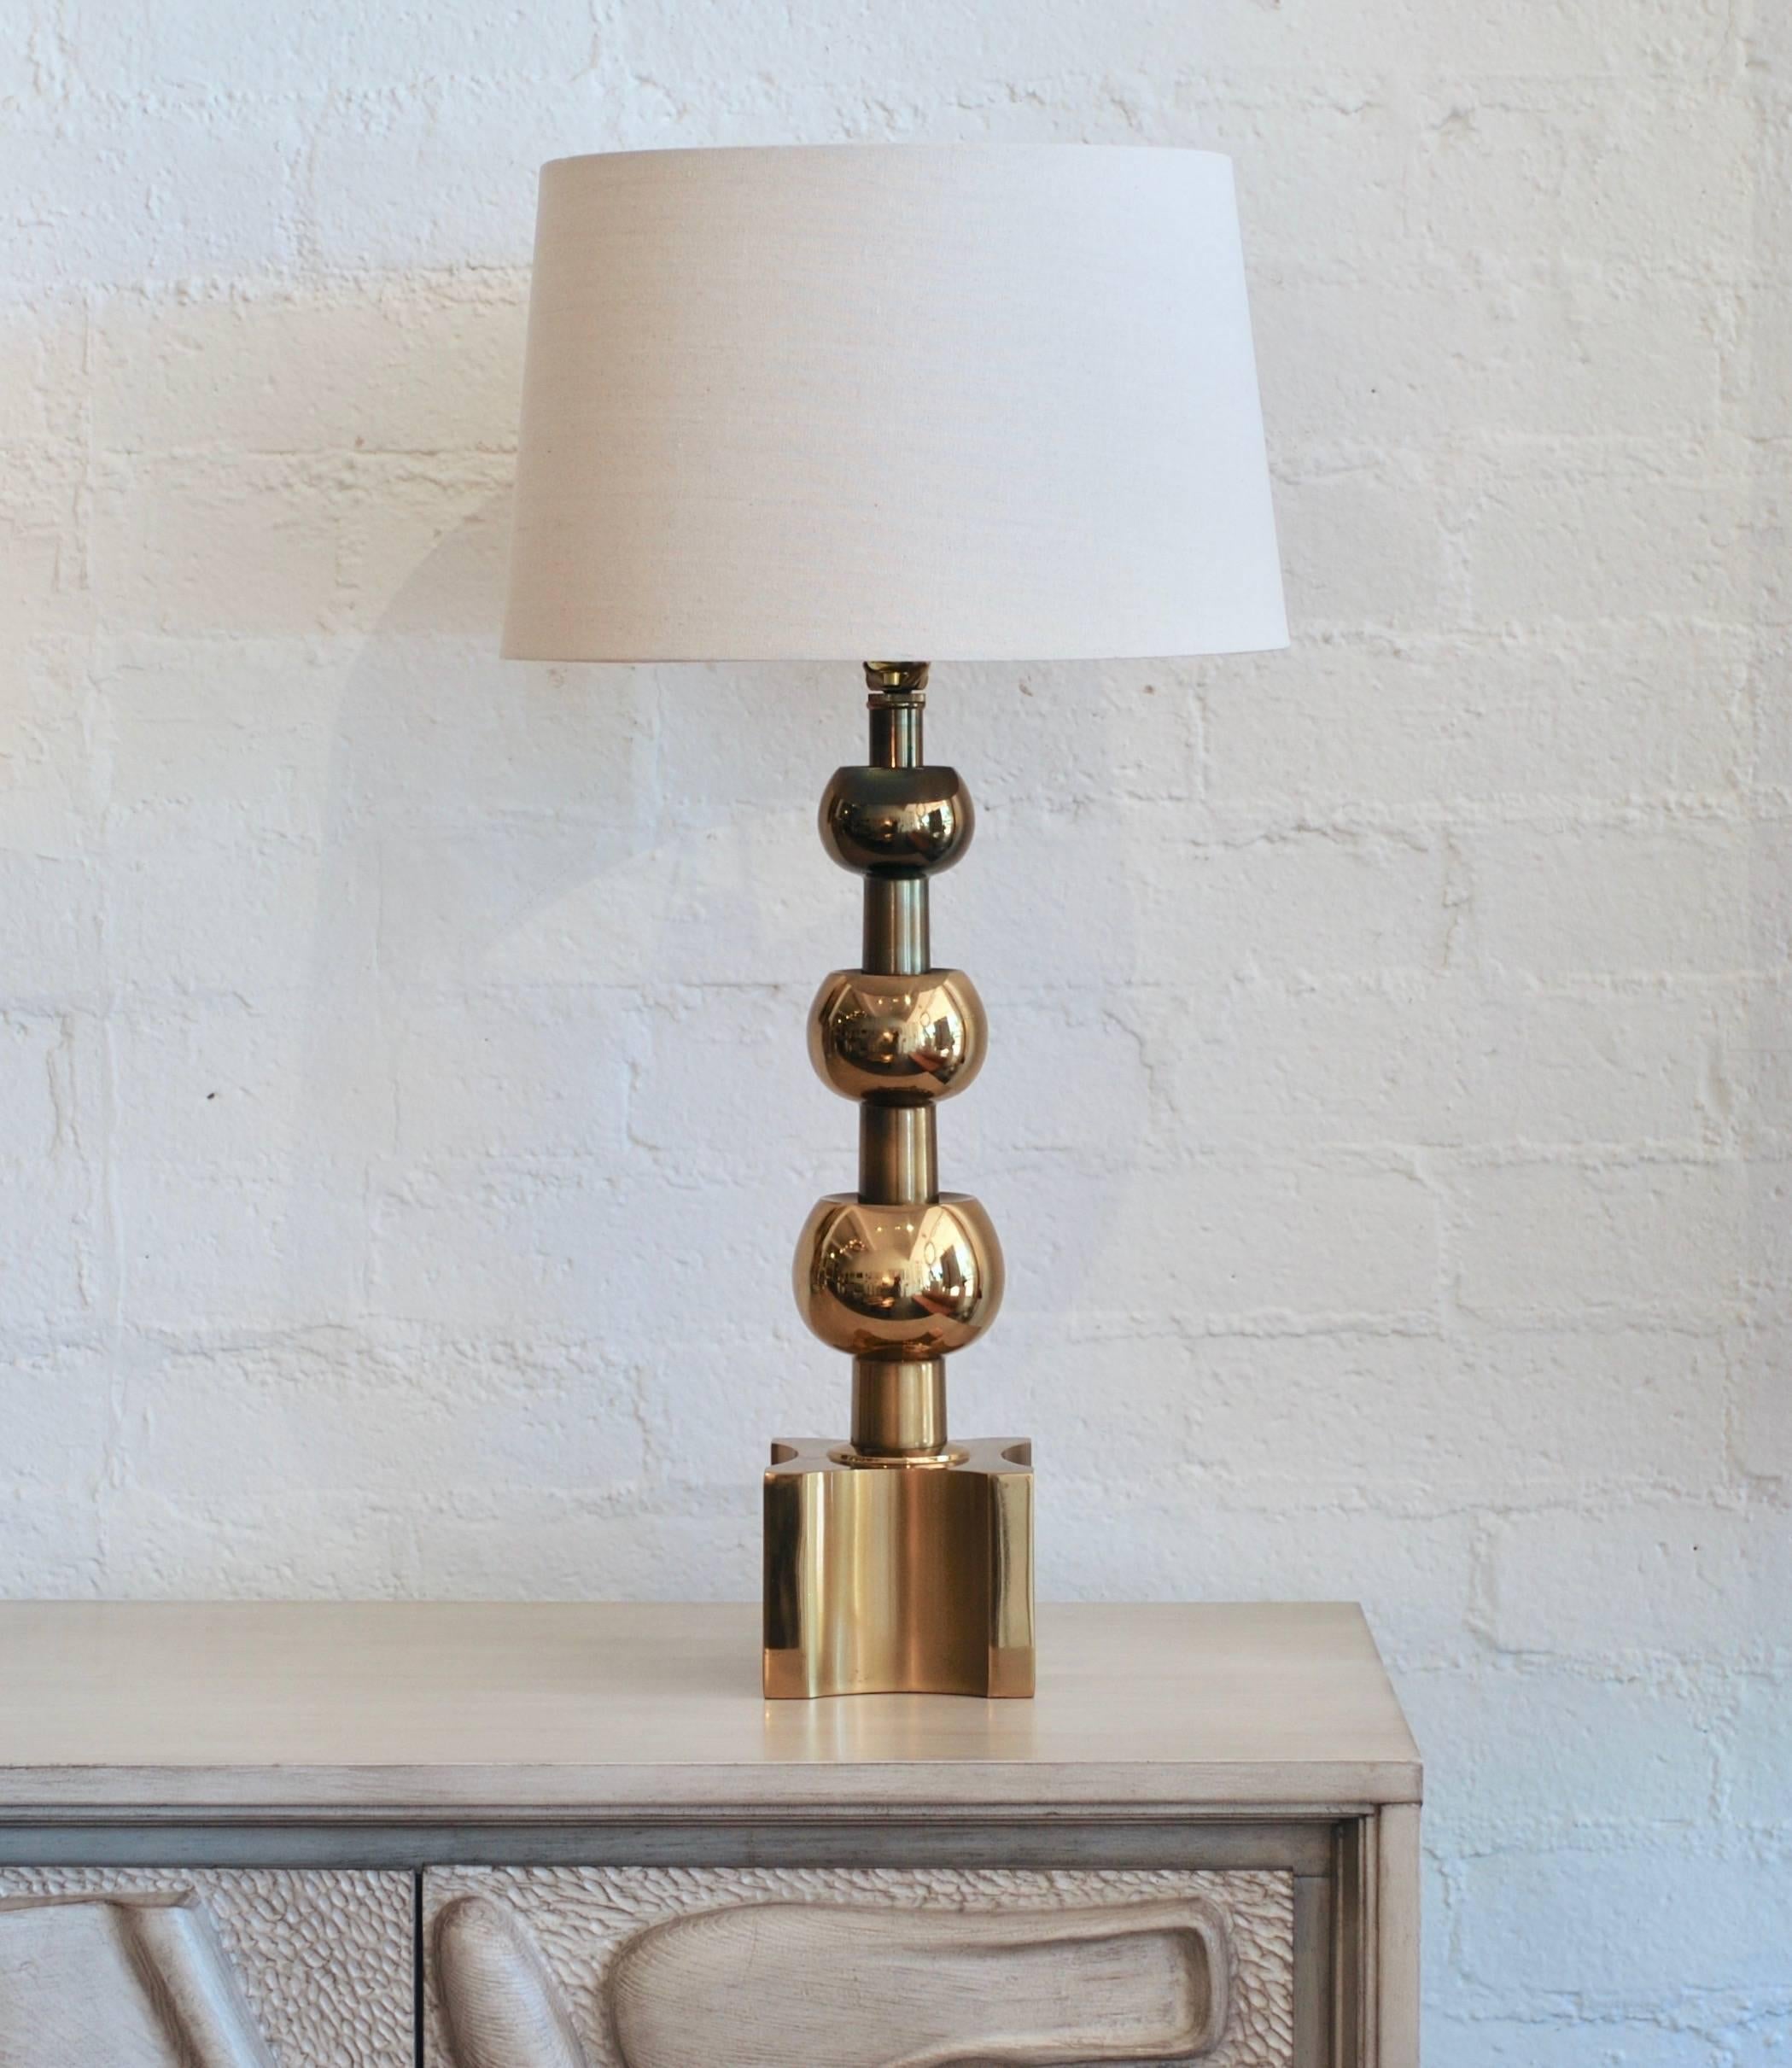 Manufactured by Stiffel and retaining the original label this brass table lamp has three orbs and a concave square base. The lamp base is 5 5/8